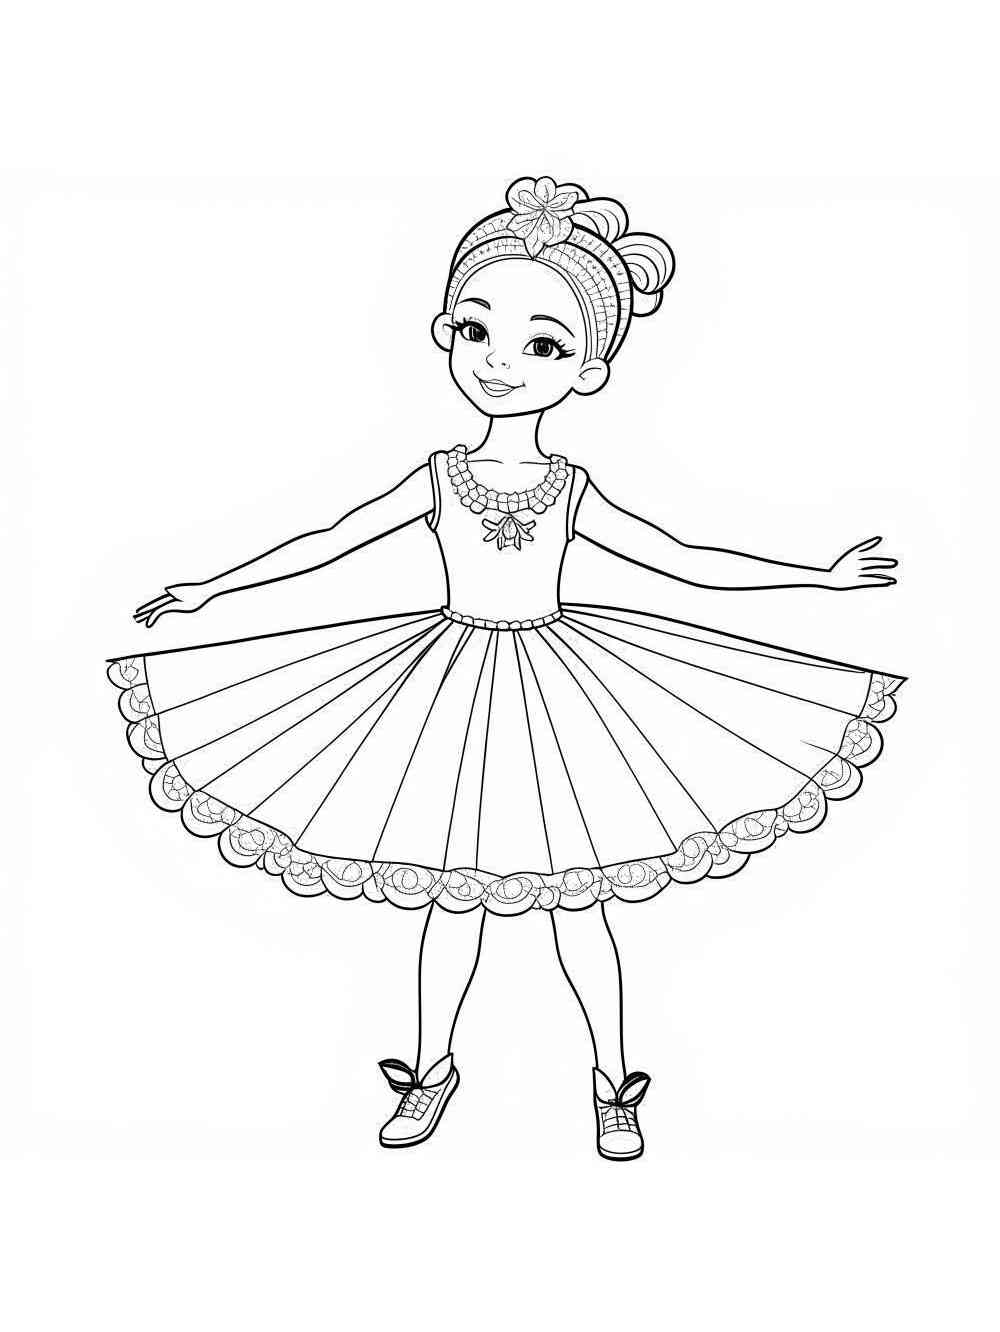 Ballerina coloring pages. Download and print Ballerina coloring pages.